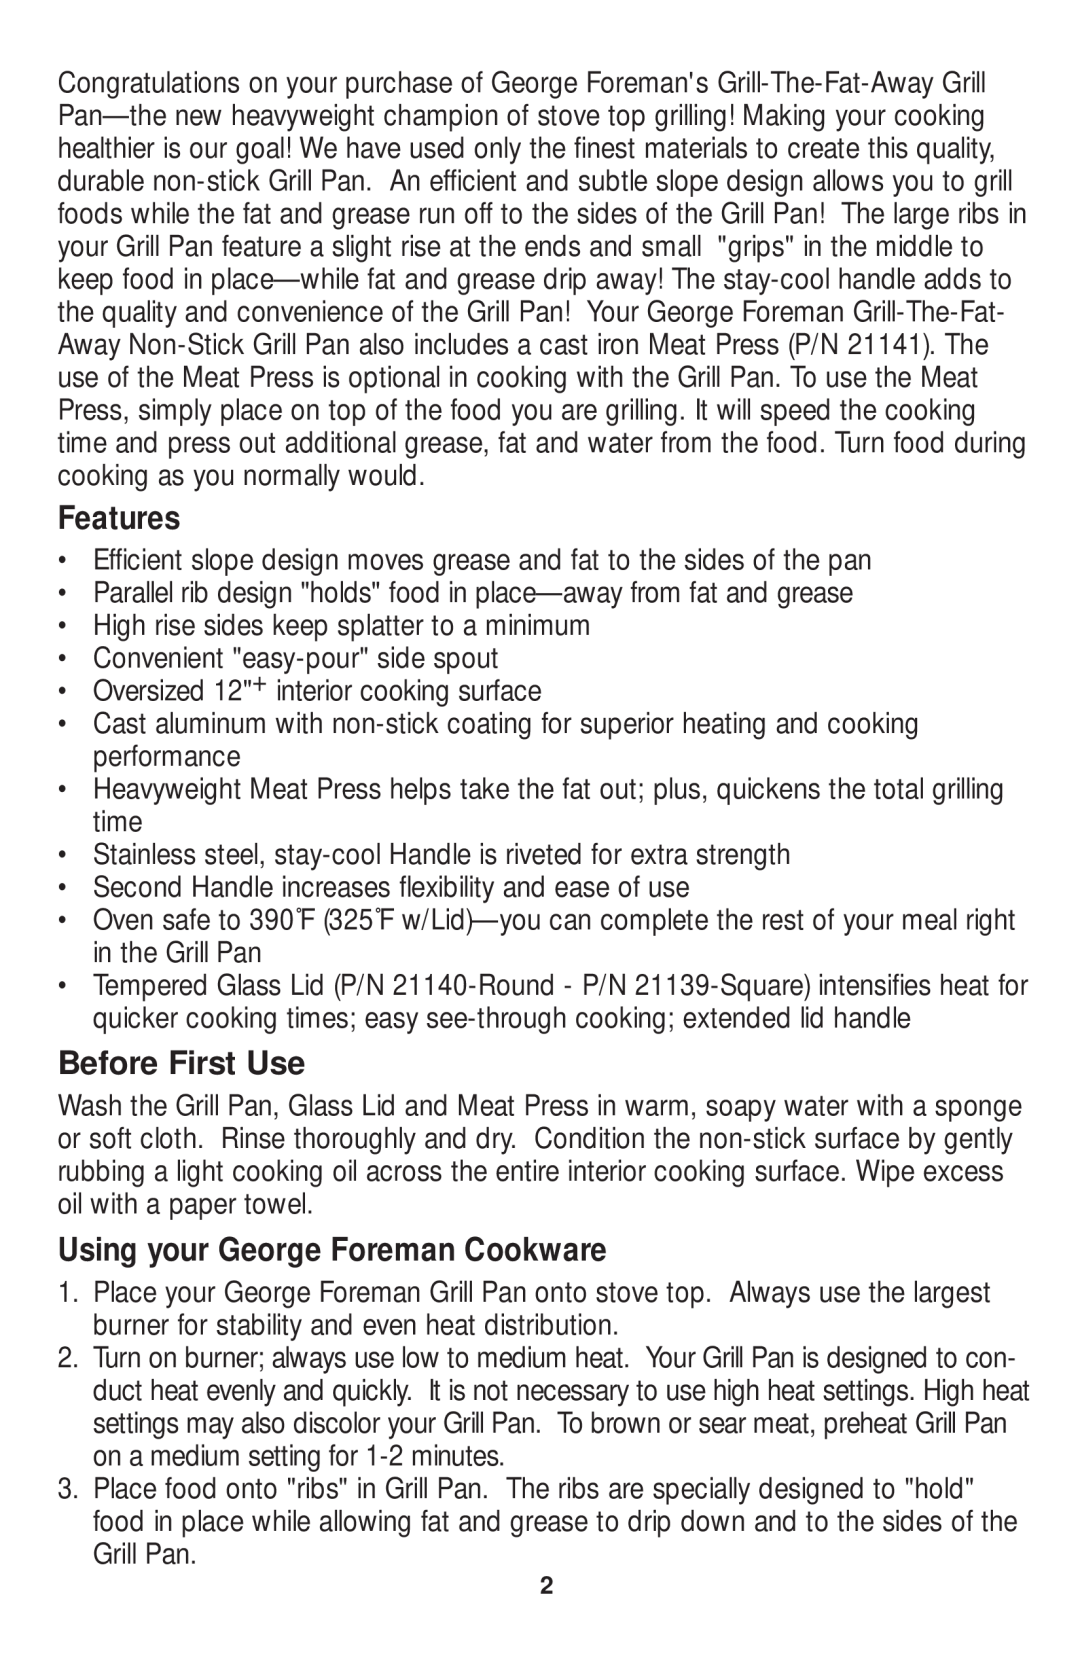 George Foreman GPC12SLPCAN, GPC12RLPCAN manual Features, Before First Use, Using your George Foreman Cookware 